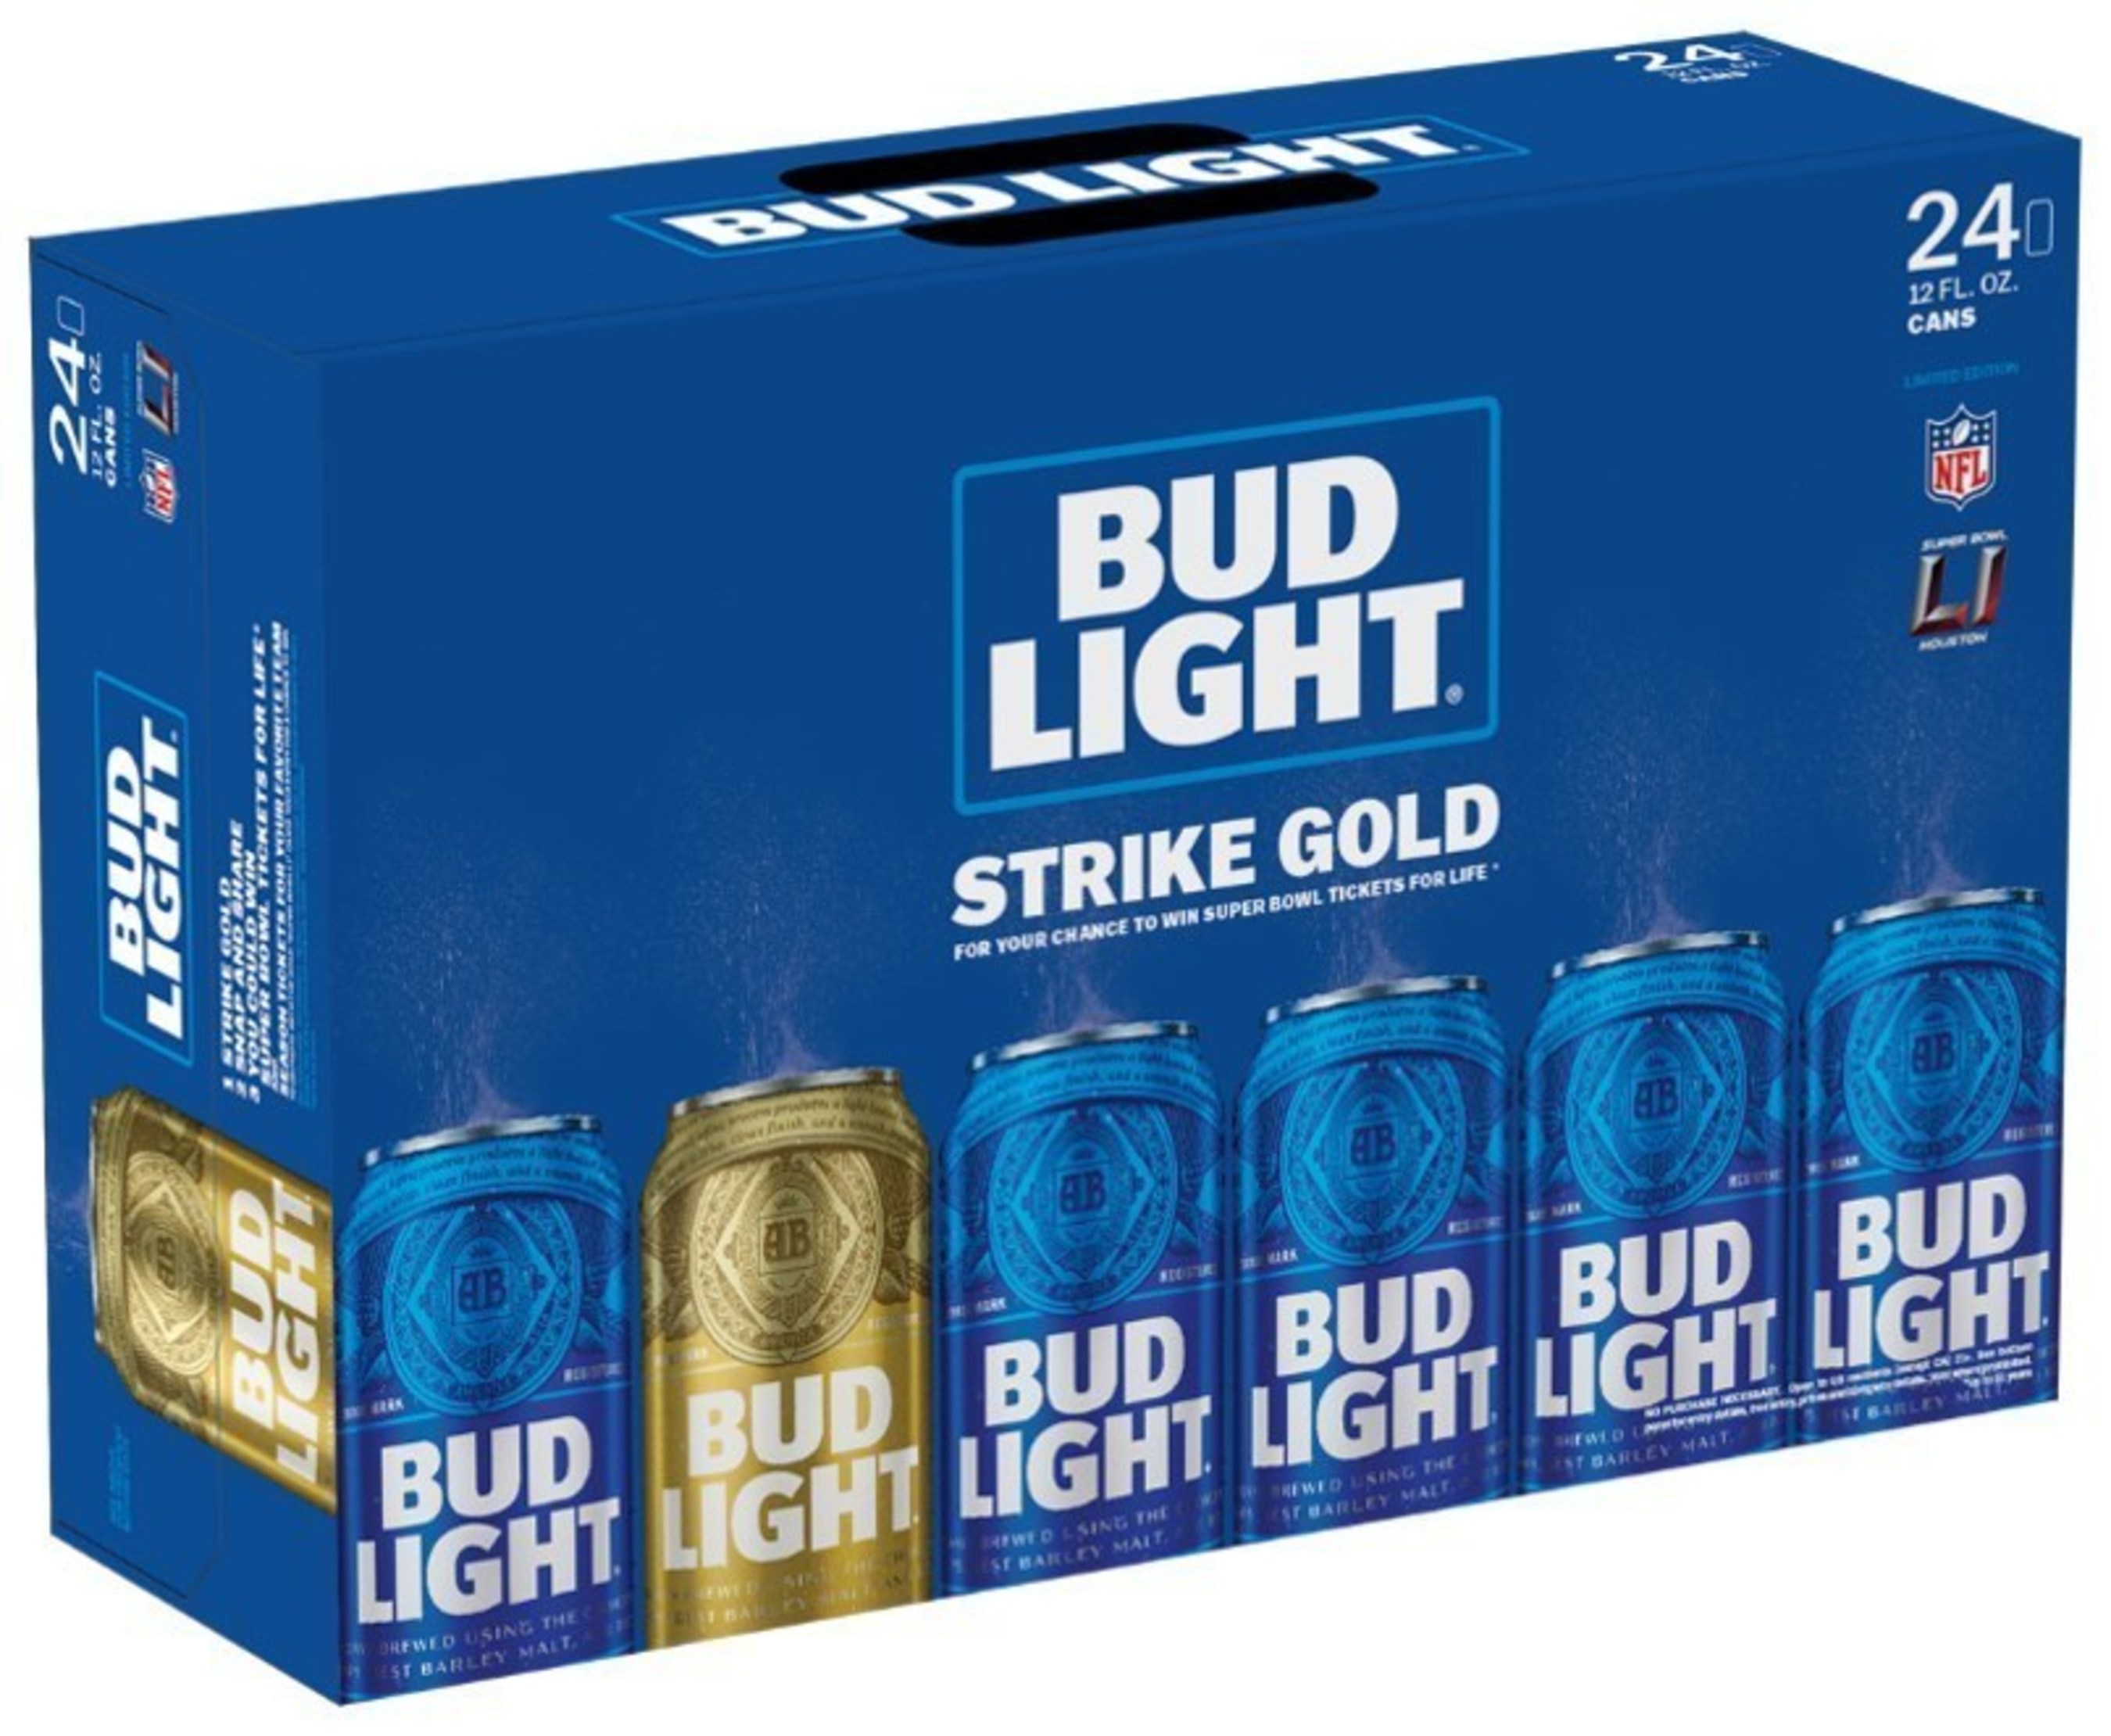 Bud Light is further celebrating passionate NFL fans around the league by introducing limited-edition "Strike Gold" Super Bowl-themed packaging. Randomly seeded in select packs are gold Super Bowl 51 cans, which - when found - give fans the opportunity to enter for a chance to score big at the end of the season and win tickets to attend the Super Bowl each year for the rest of their life (up to 51 years).